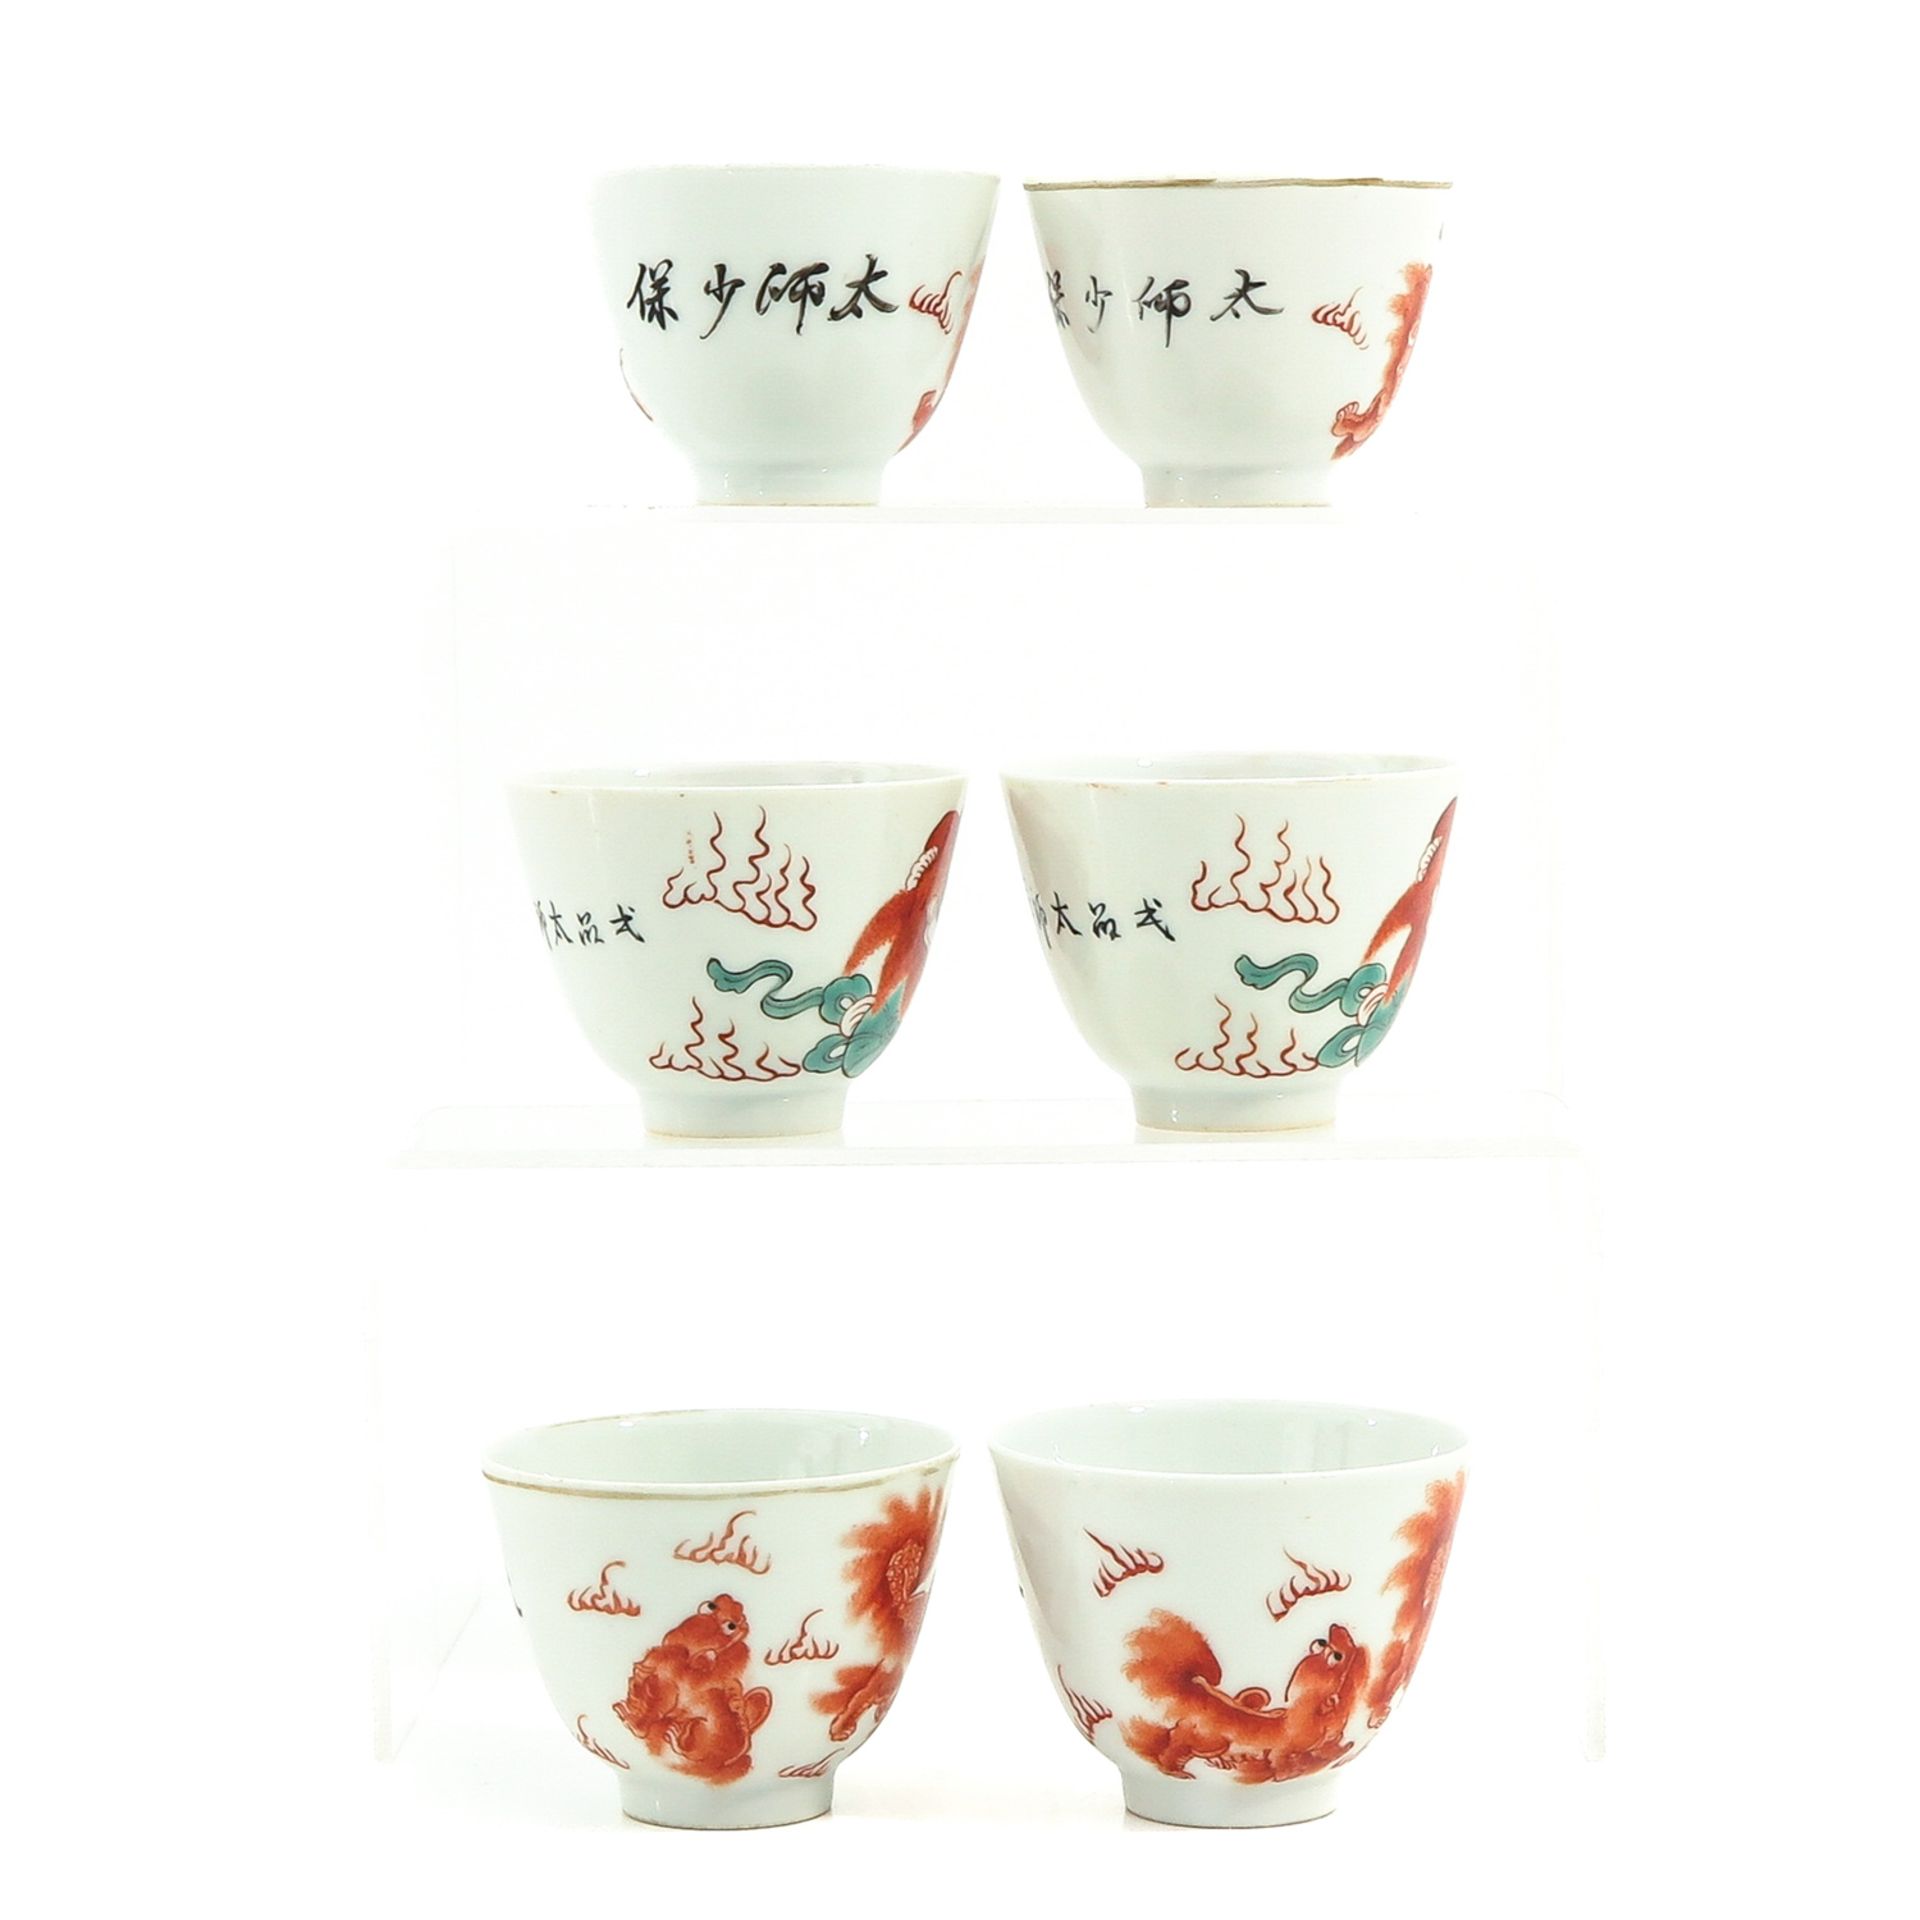 A Collection of 6 Cups - Image 4 of 10